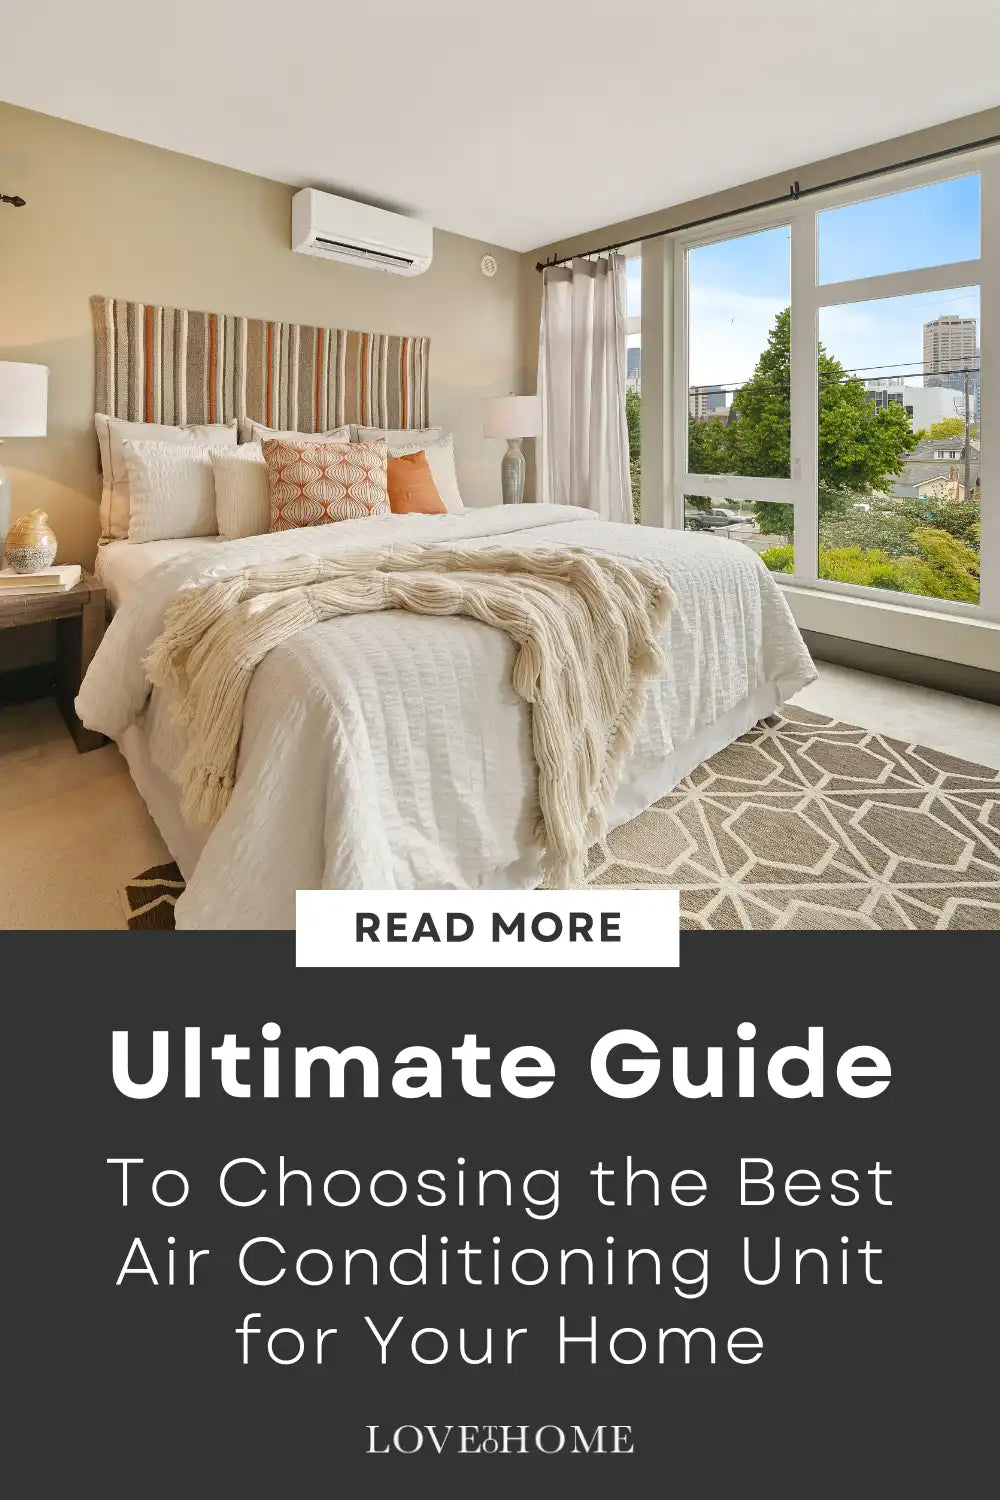 The Ultimate Guide to Choosing the Best Air Conditioning Unit for Your Home